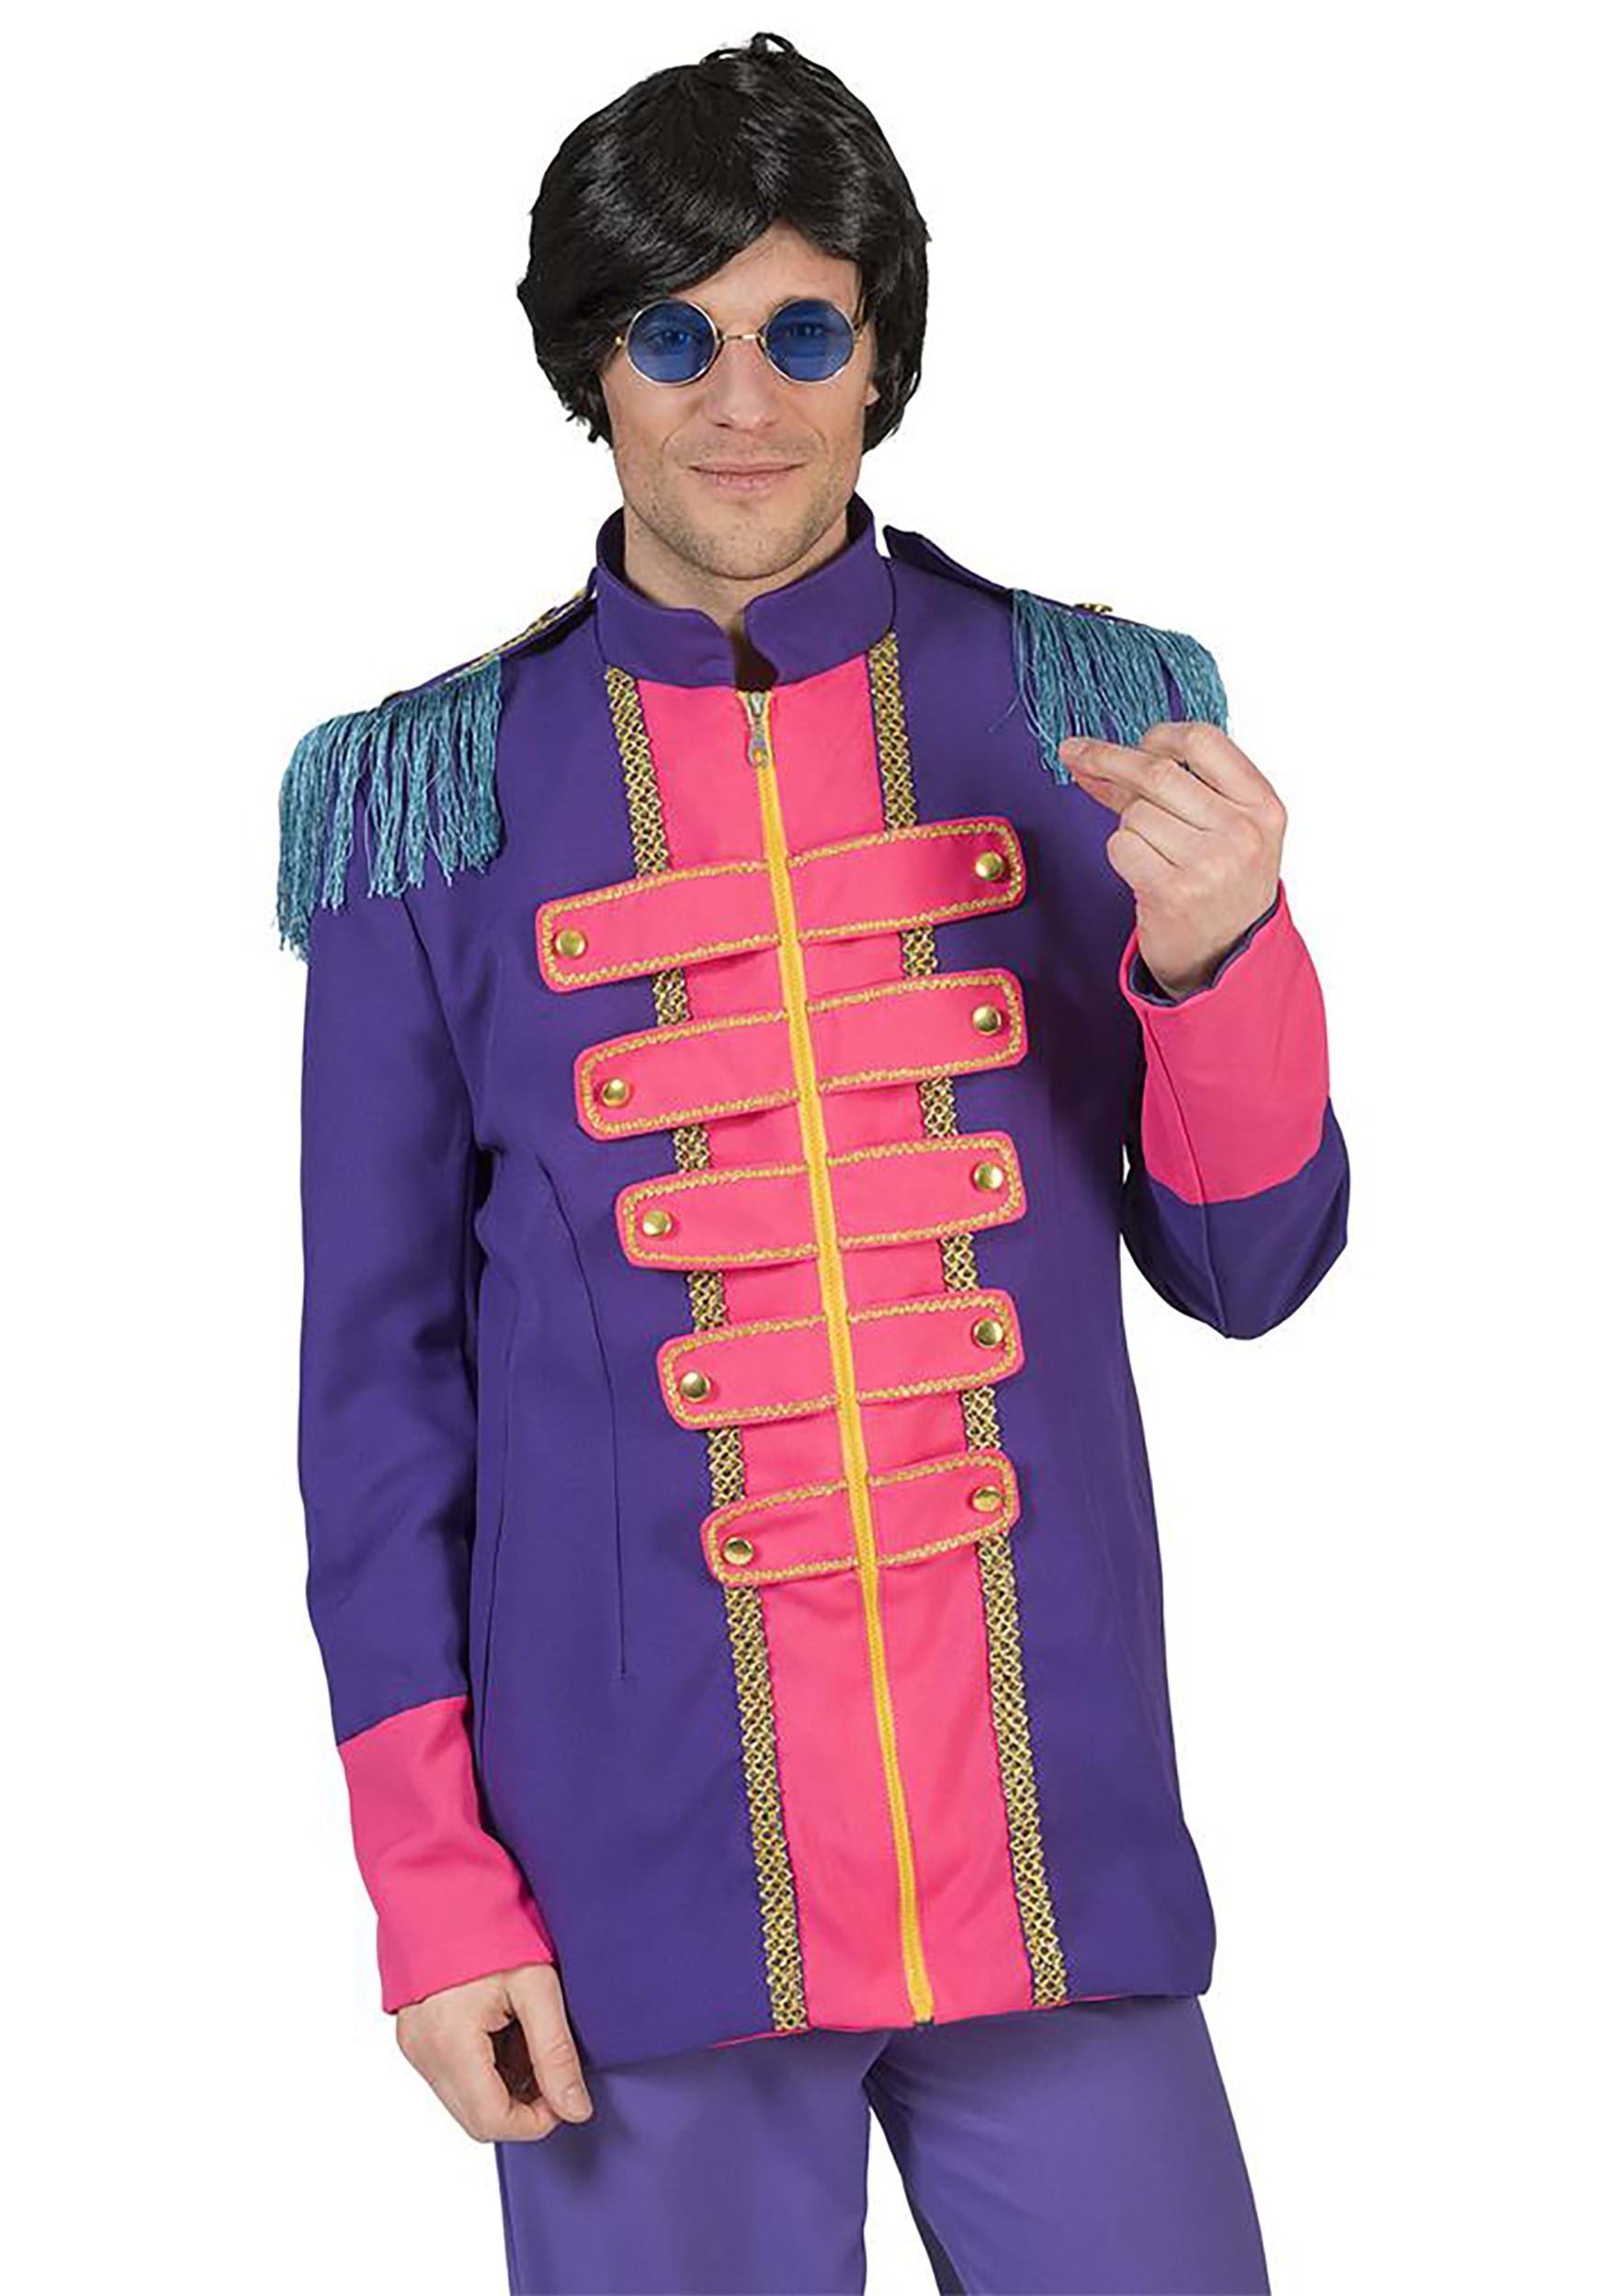 Image of Sgt Pepper Album Inspired Purple Jacket | Costume Jackets ID FY608374-S